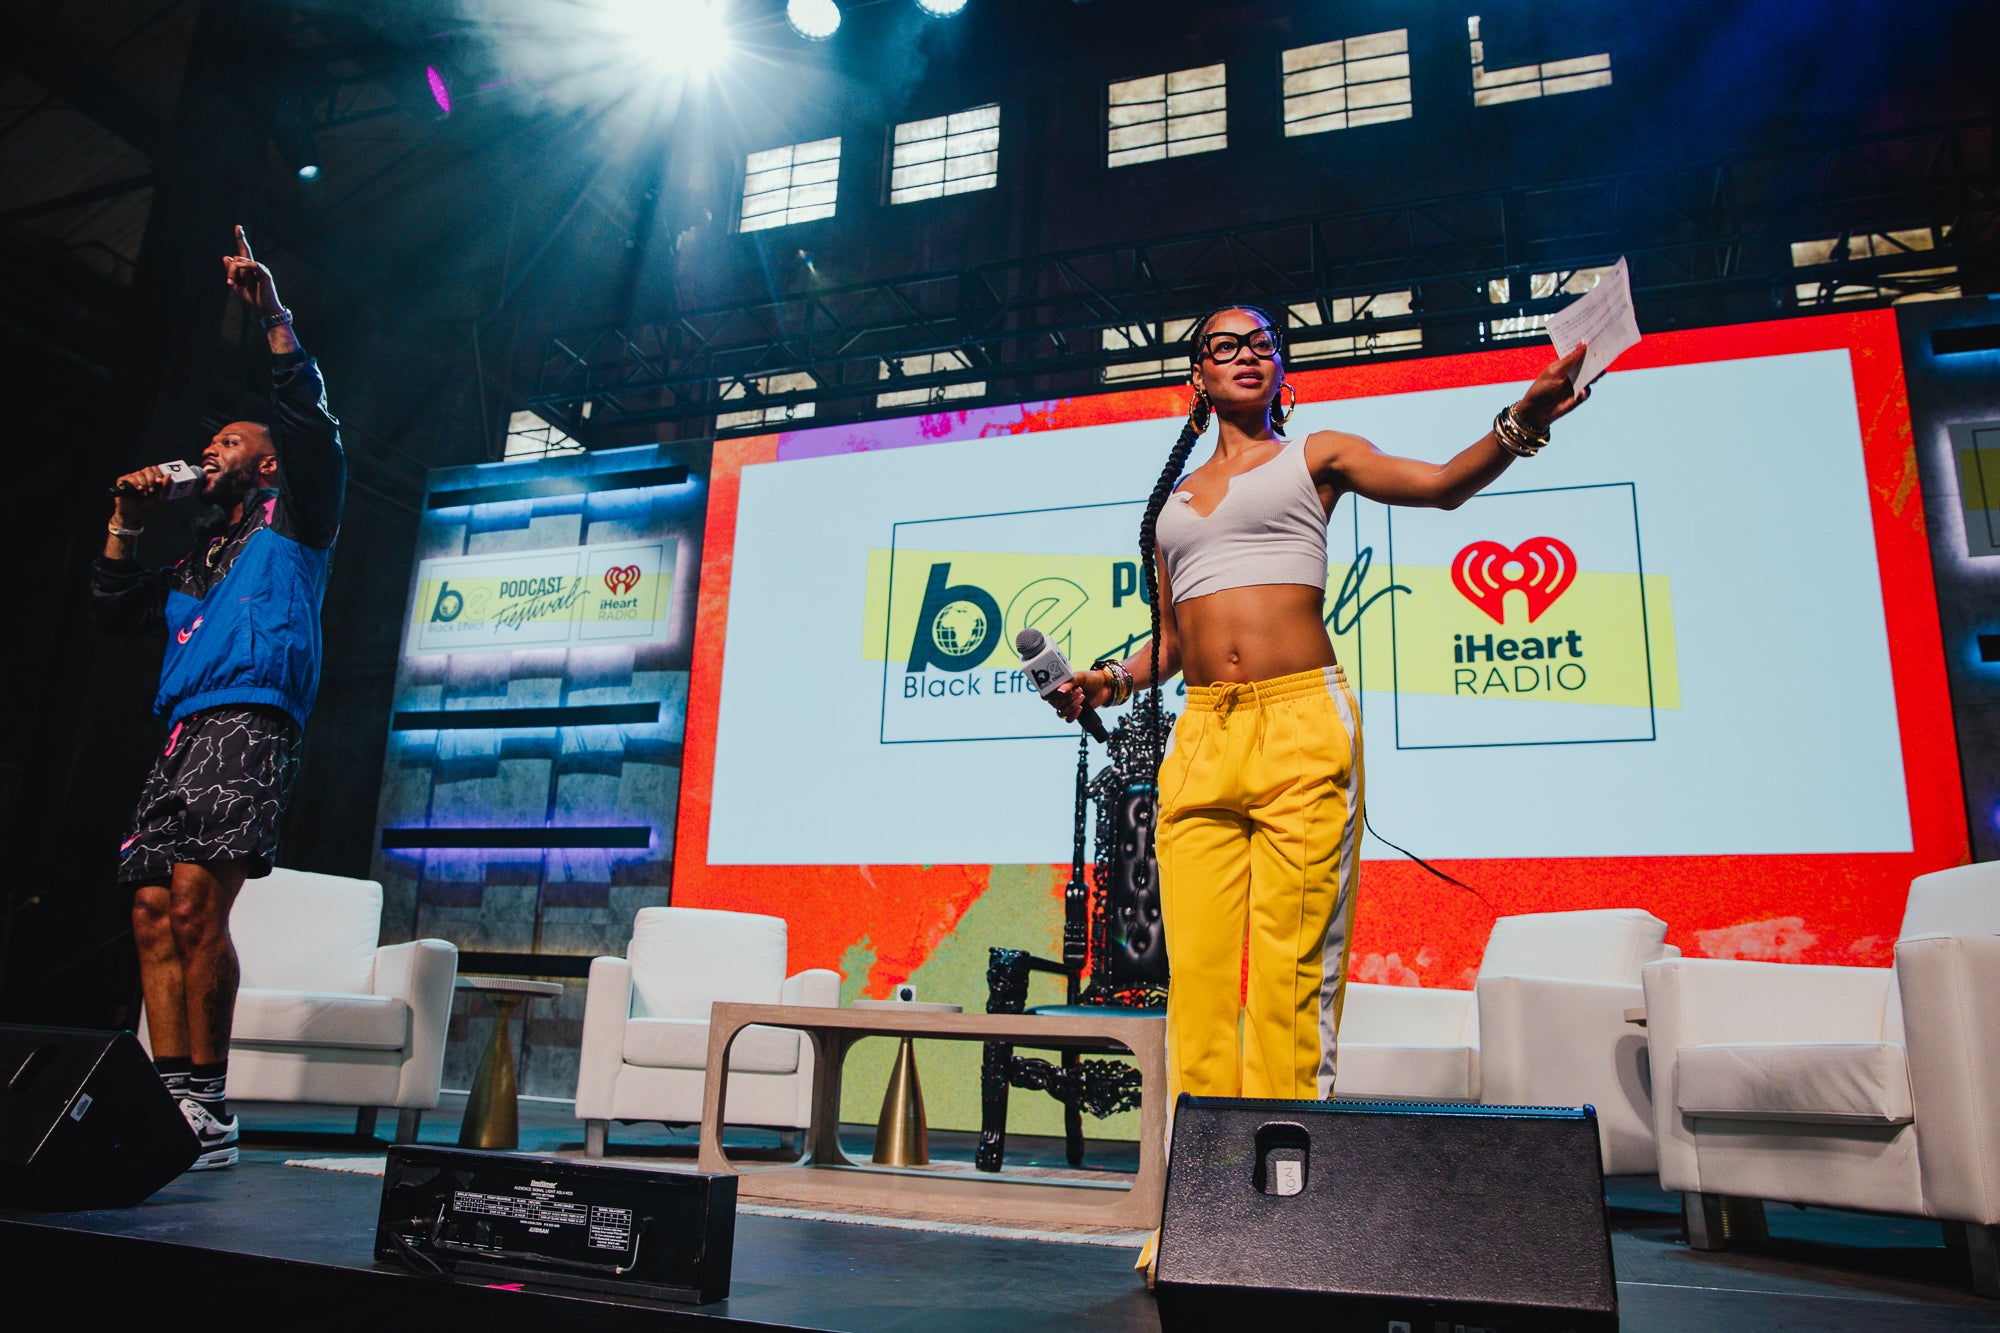 Black Effect 2024 Podcast Festival: Amplifying Black Voices in Entertainment